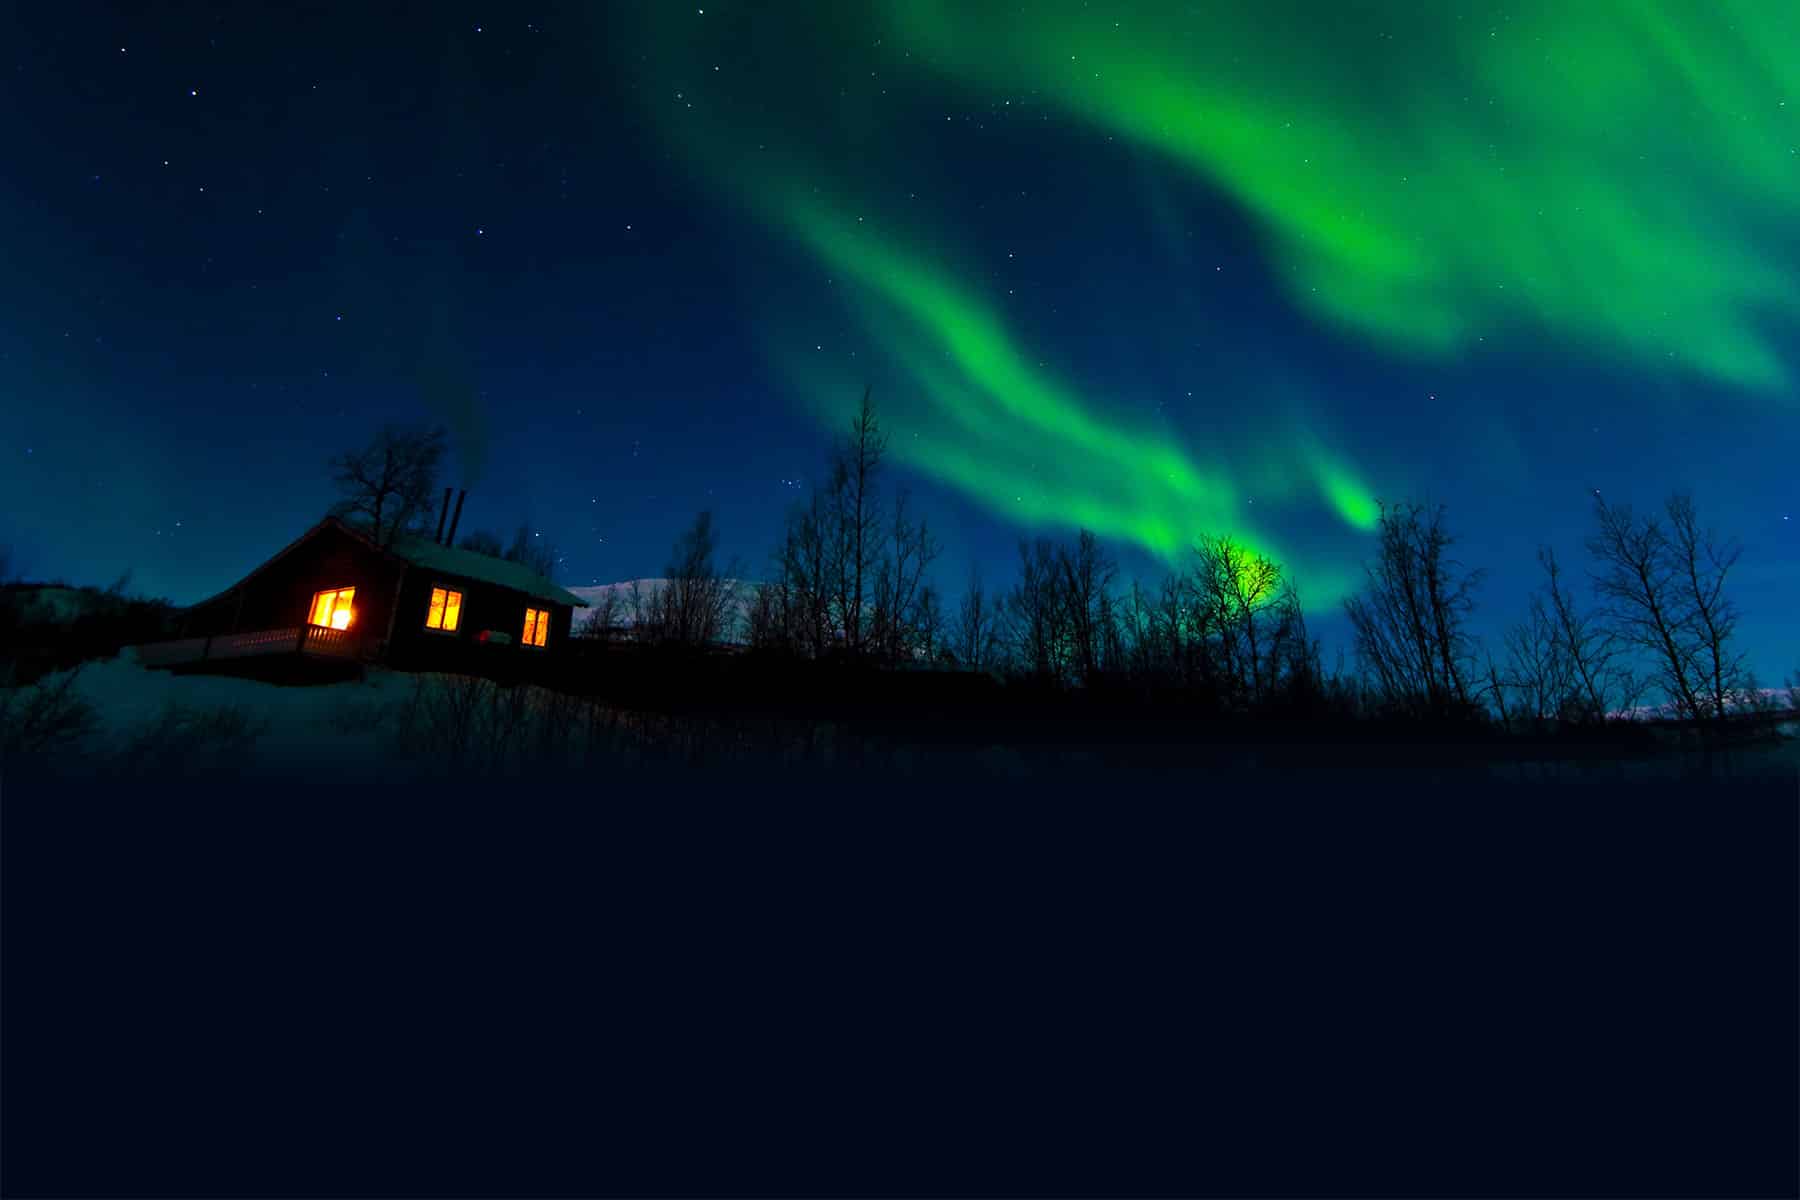 Alaskan cabin lit up at night with Northern Lights